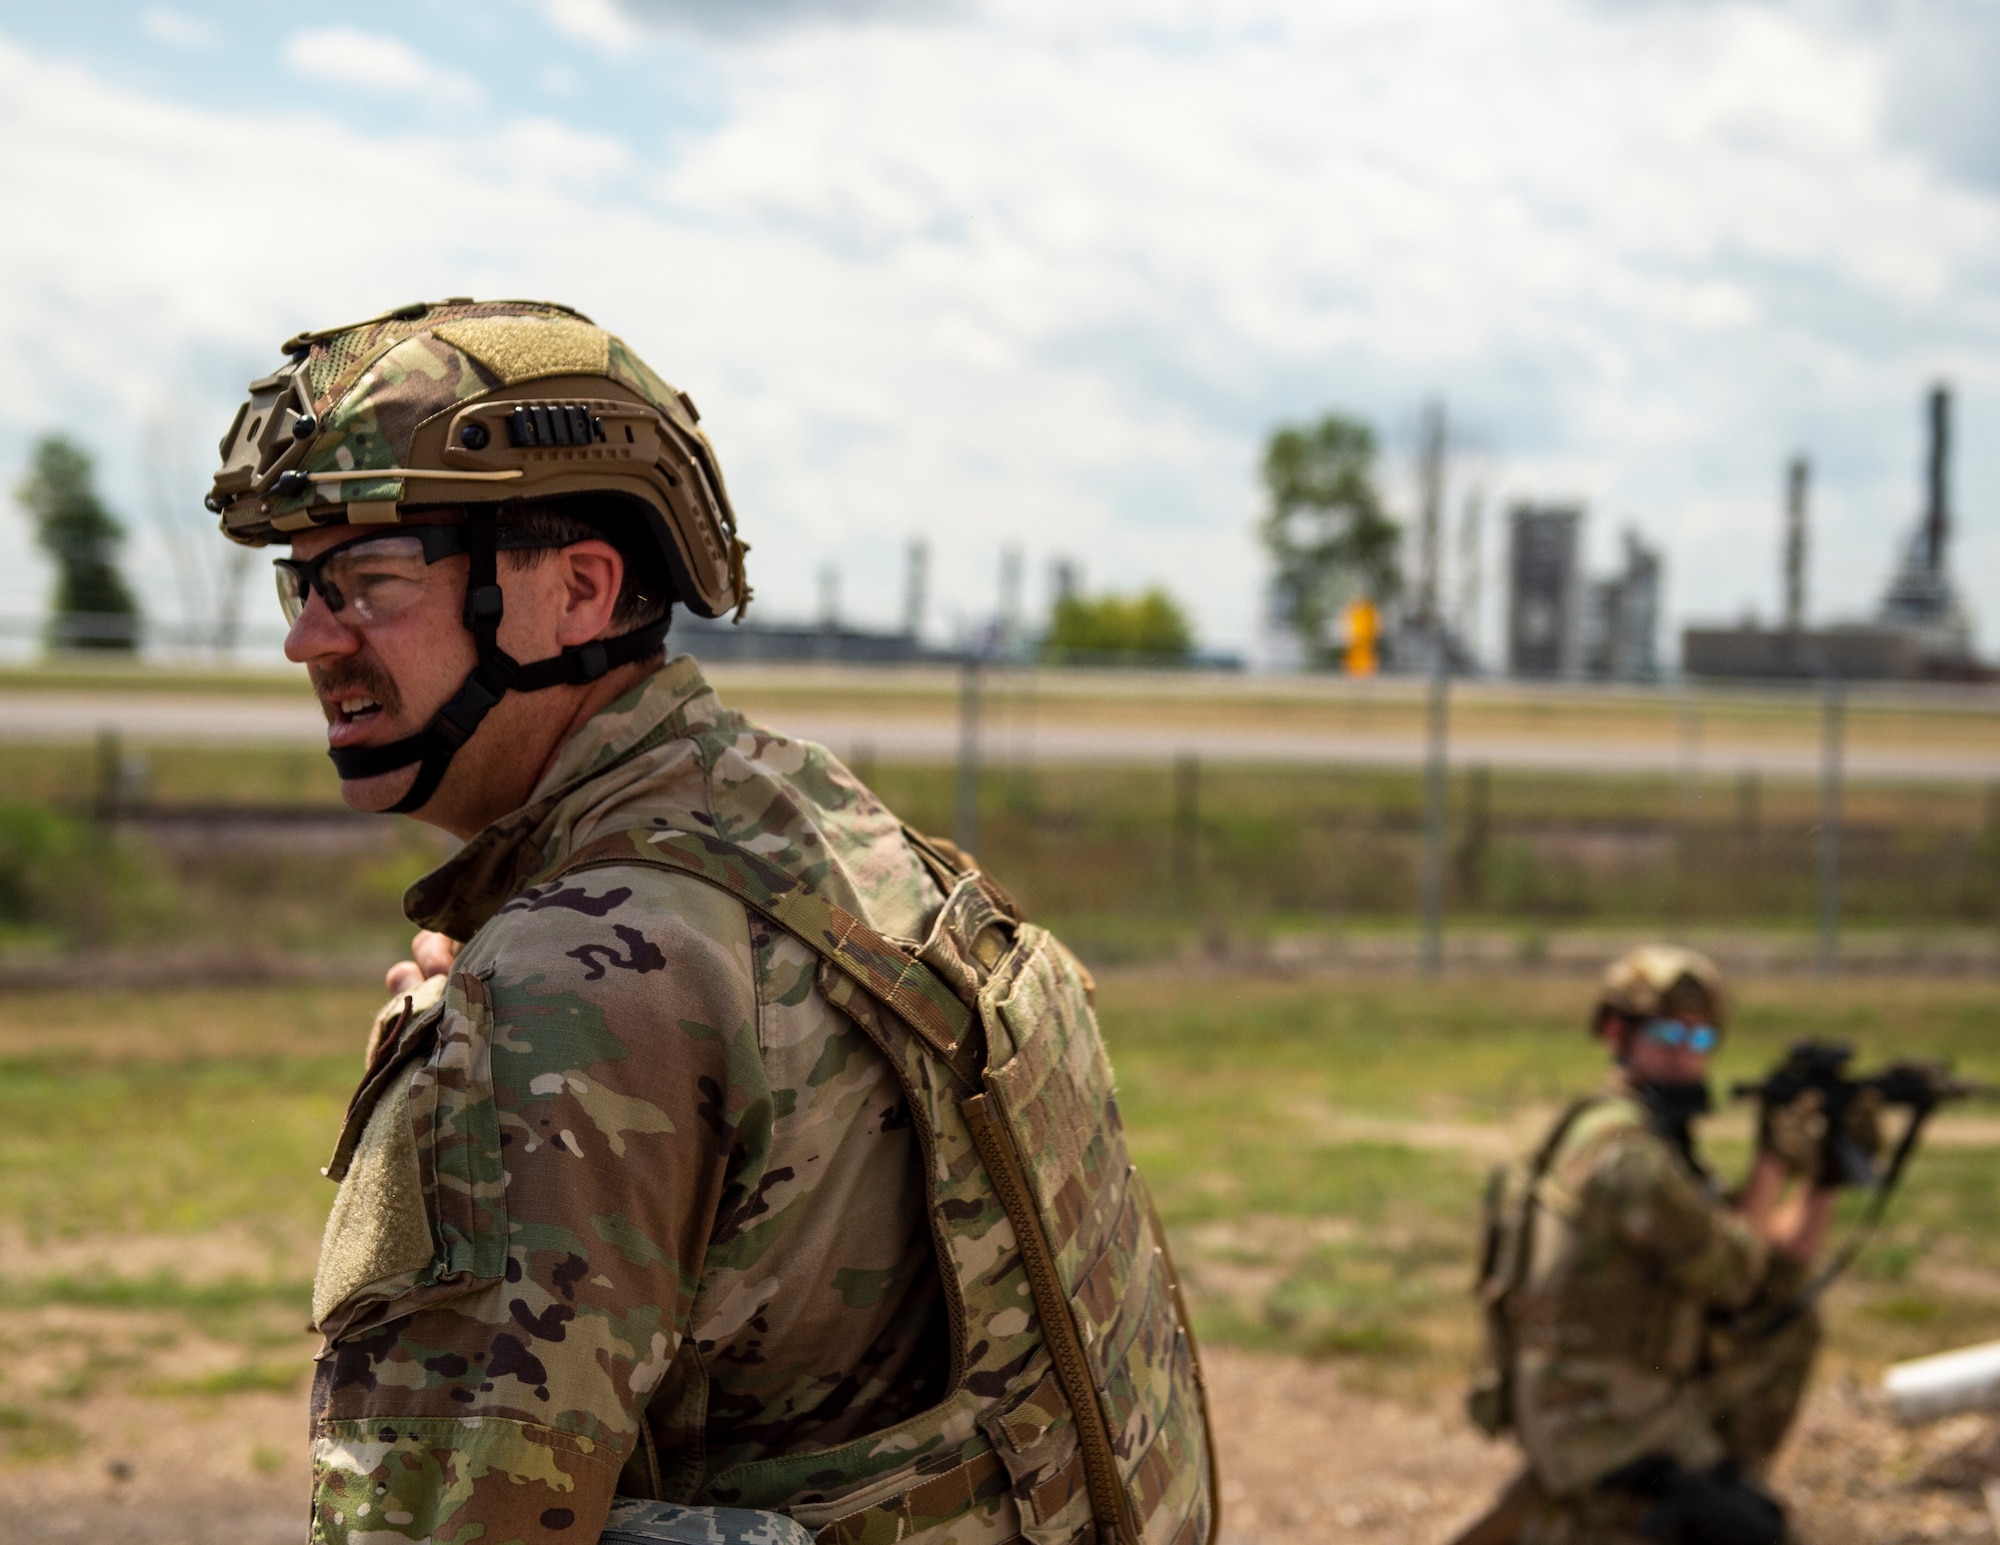 U.S. Air Force Tech. Sgt. Jeff Allen, left, 146th Contingency Response Flight, California Air National Guard, provides security for medical teams in Rosemount, Minn., July 27, 2022.